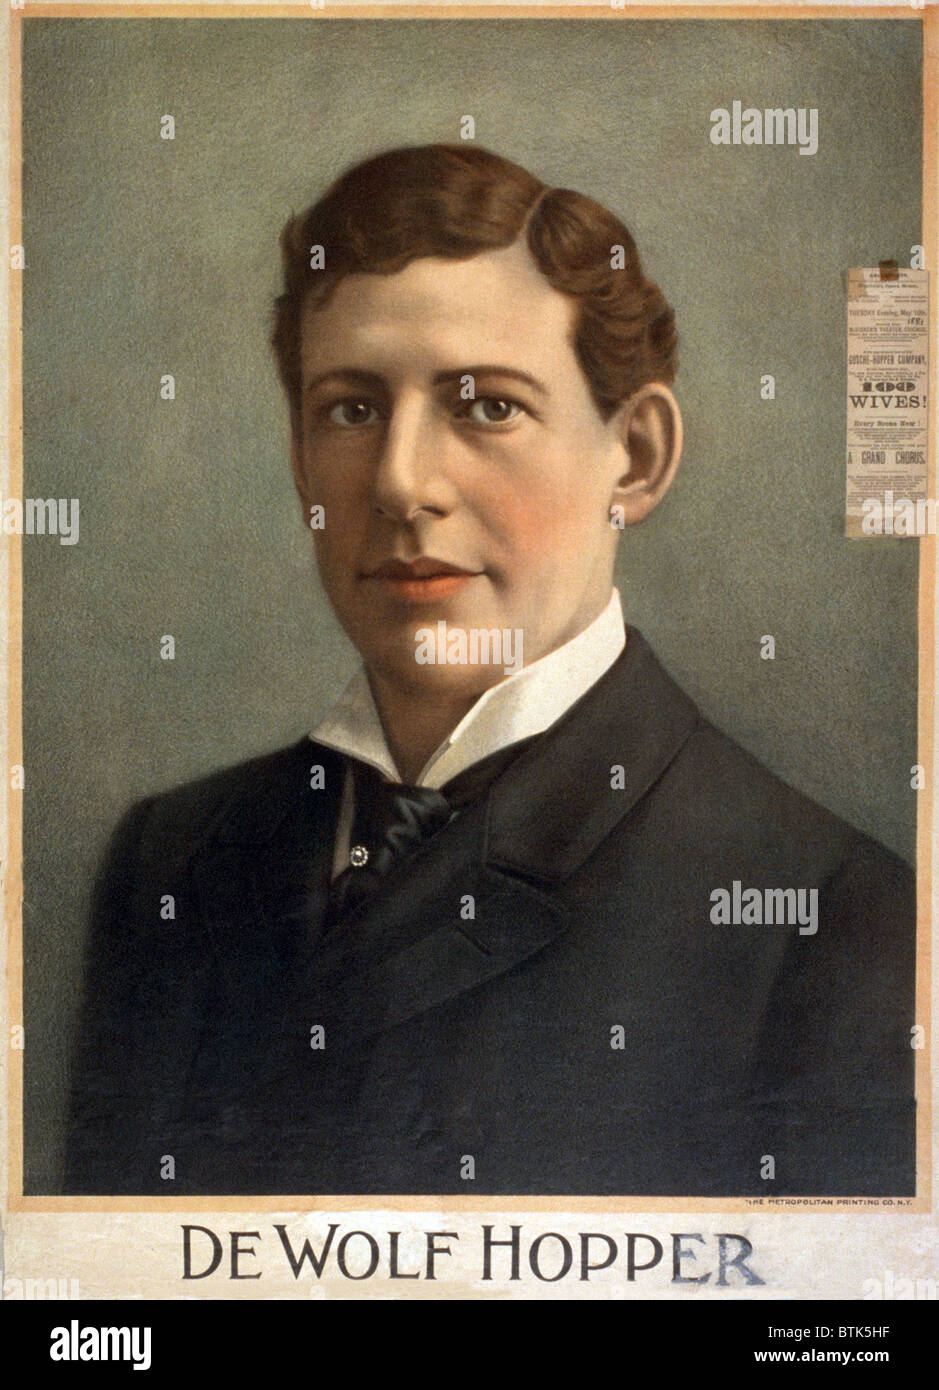 De Wolf Hopper (1858-1935), American comic actor in portrait poster from the early years of his long stage career. 1881. Stock Photo